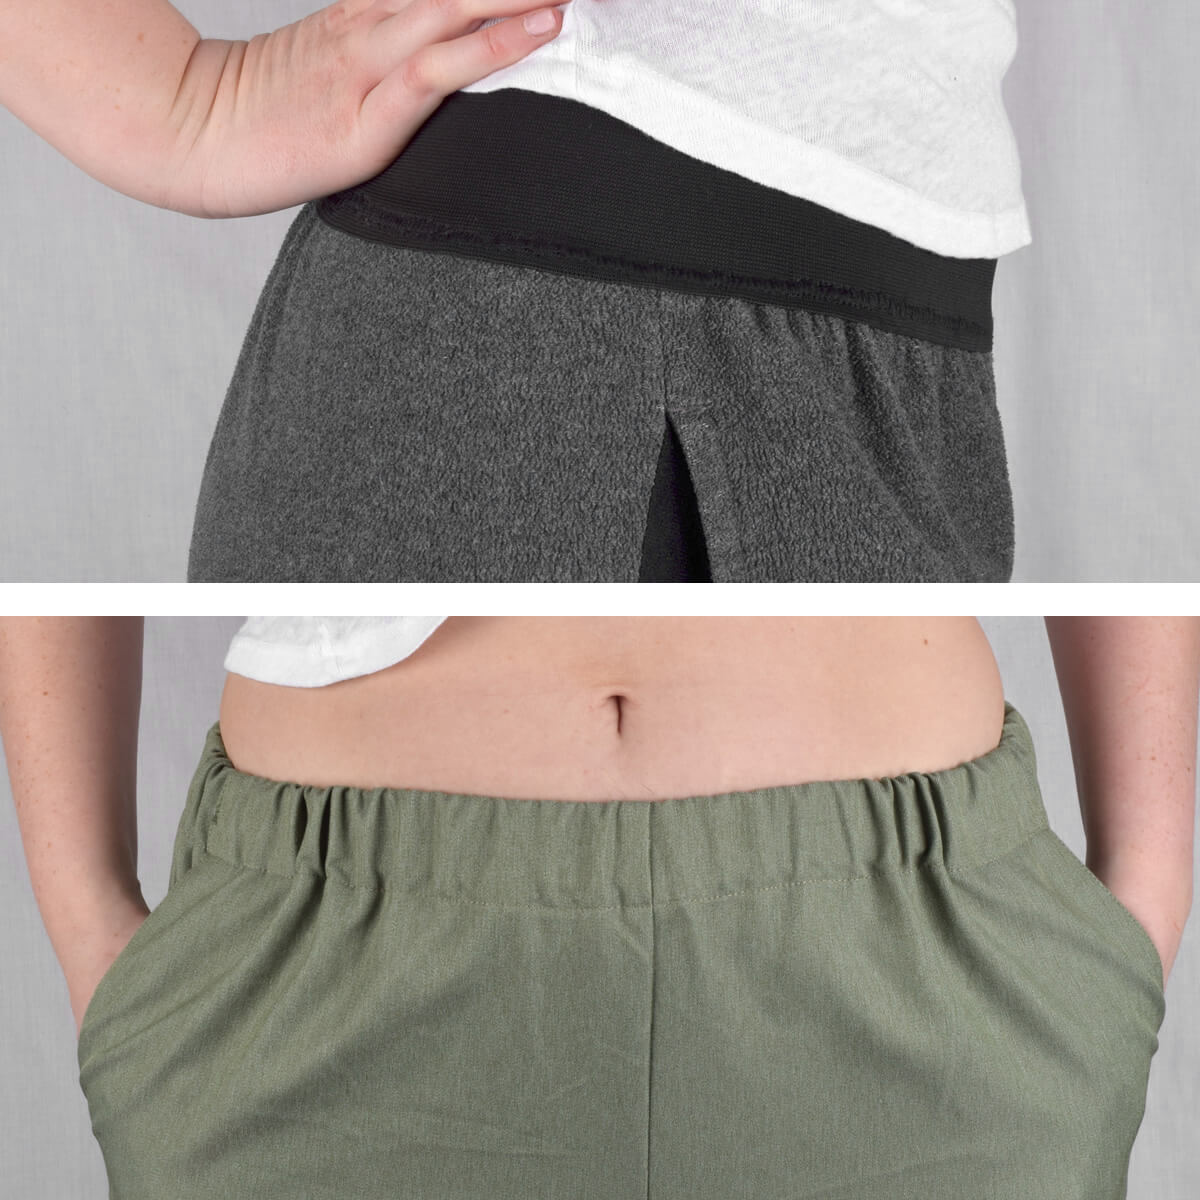 How to Replace an Elastic Waistband